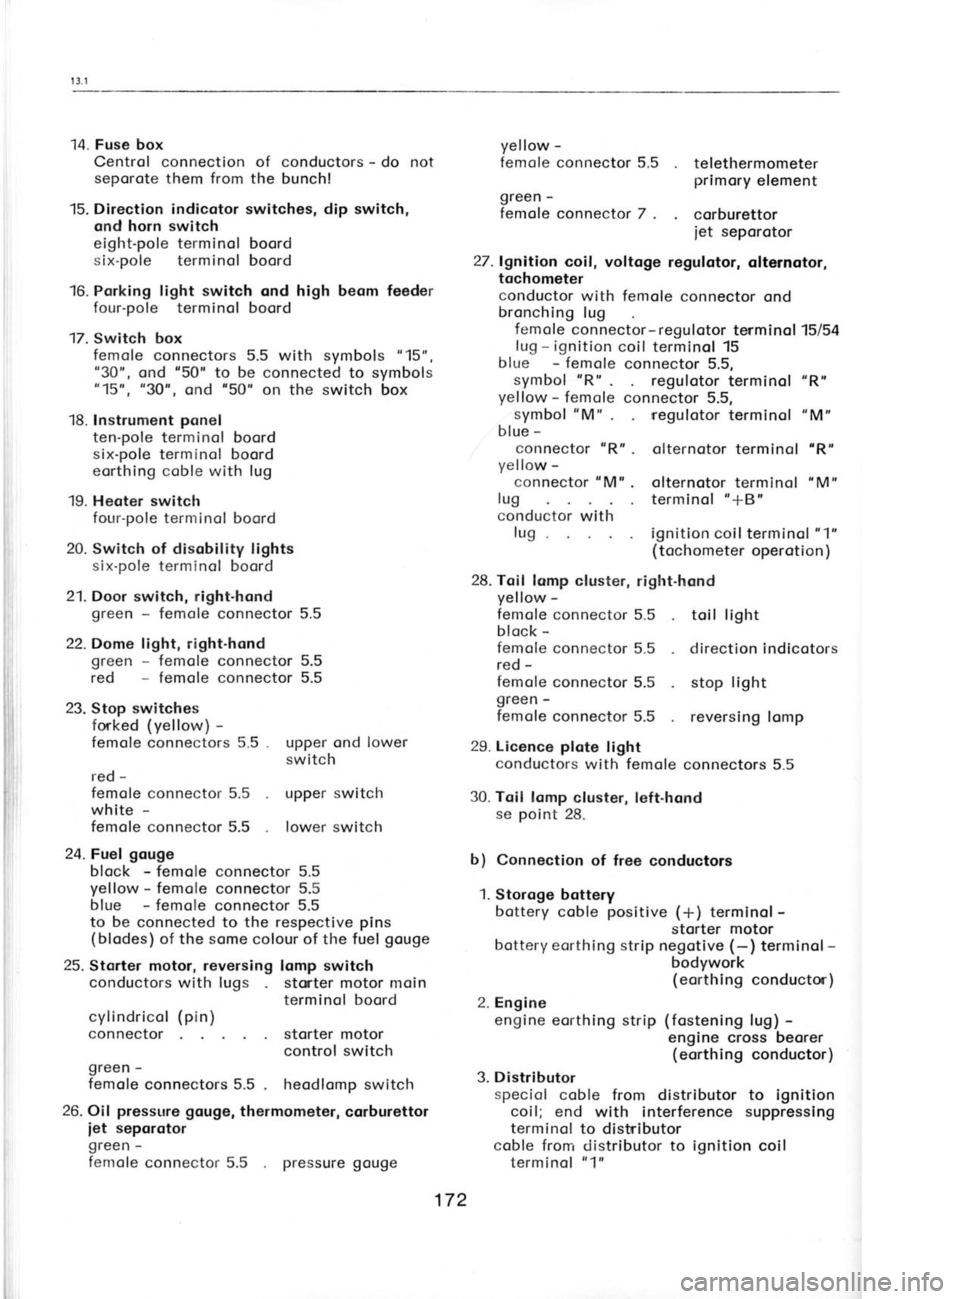 SKODA 120L 1980  Workshop Manual i
iiiI 14. Fuse box
Centrol connection of  conductors  - 
do  not
seporote  them from the  bunch!
15. Direction indicotor switches, dip  switch,
and horn switch
eight-pole  terminol 
boord
six-pole  